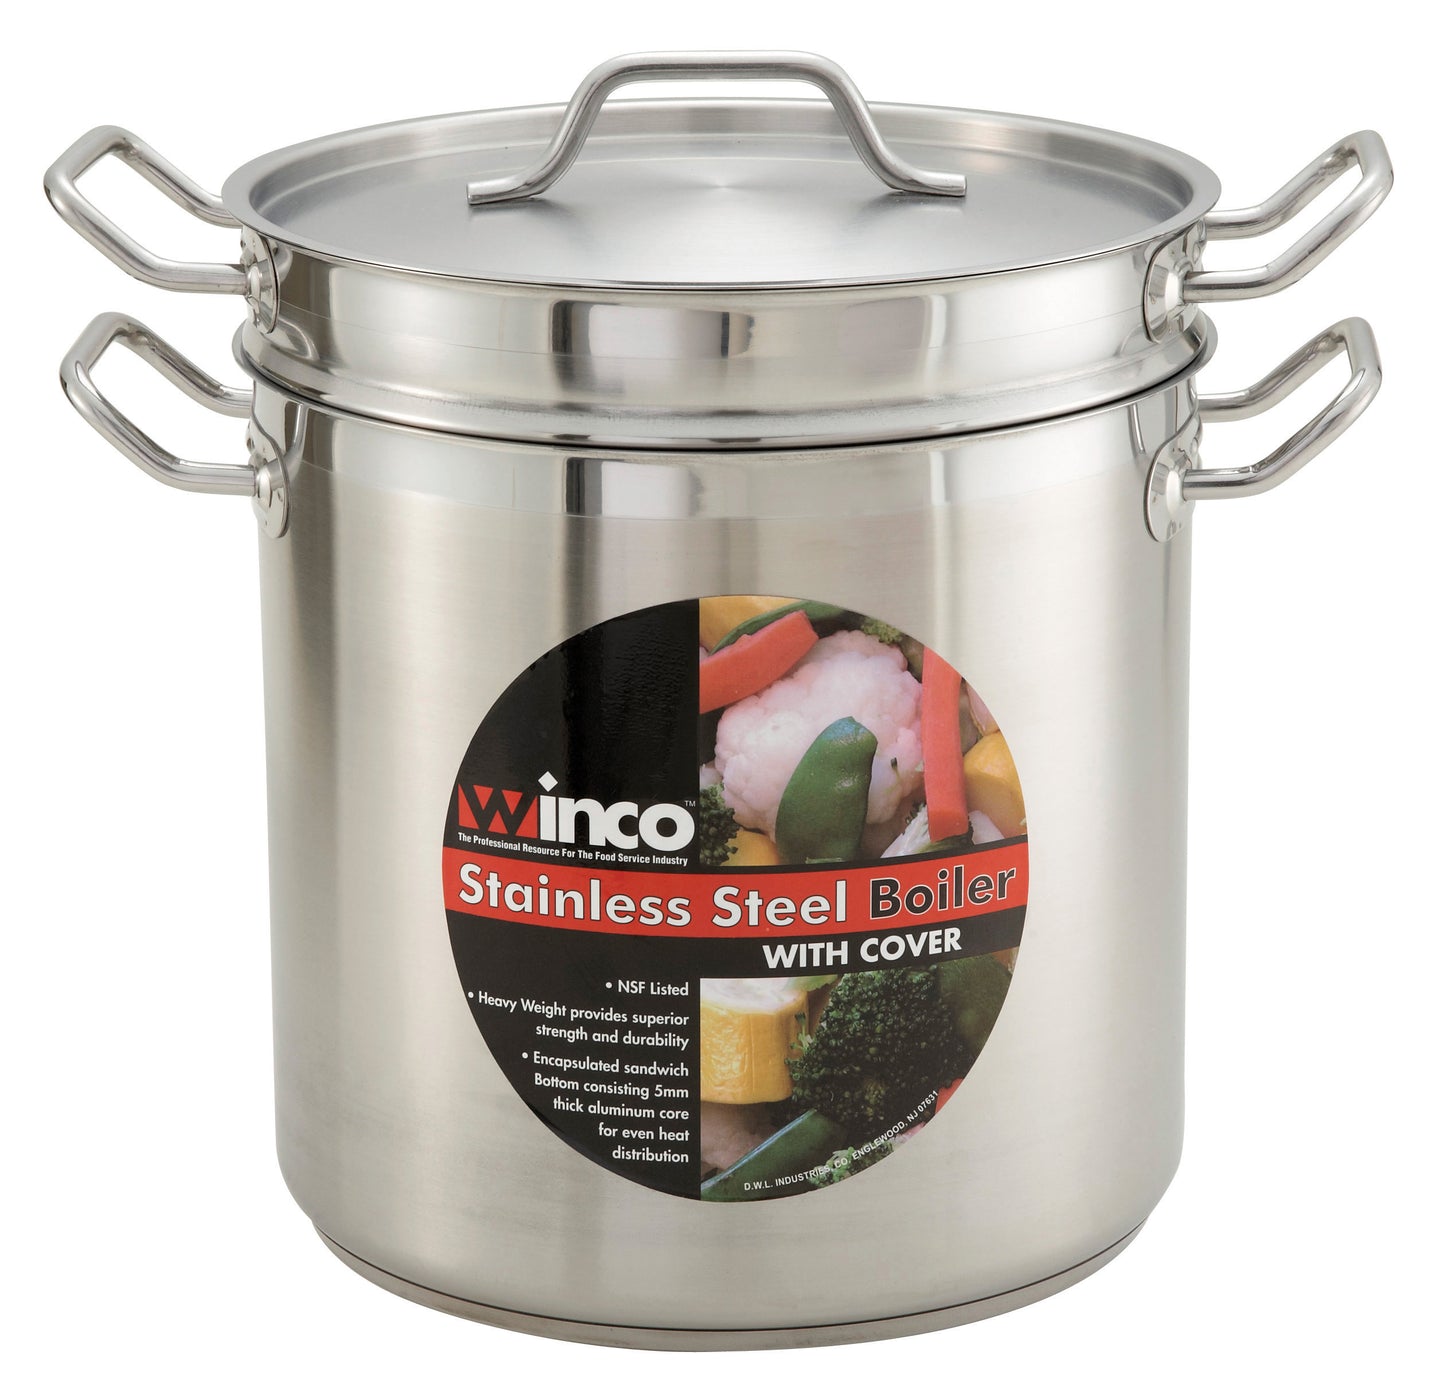 Stainless Steel Double Boiler with Cover - 12 Quart